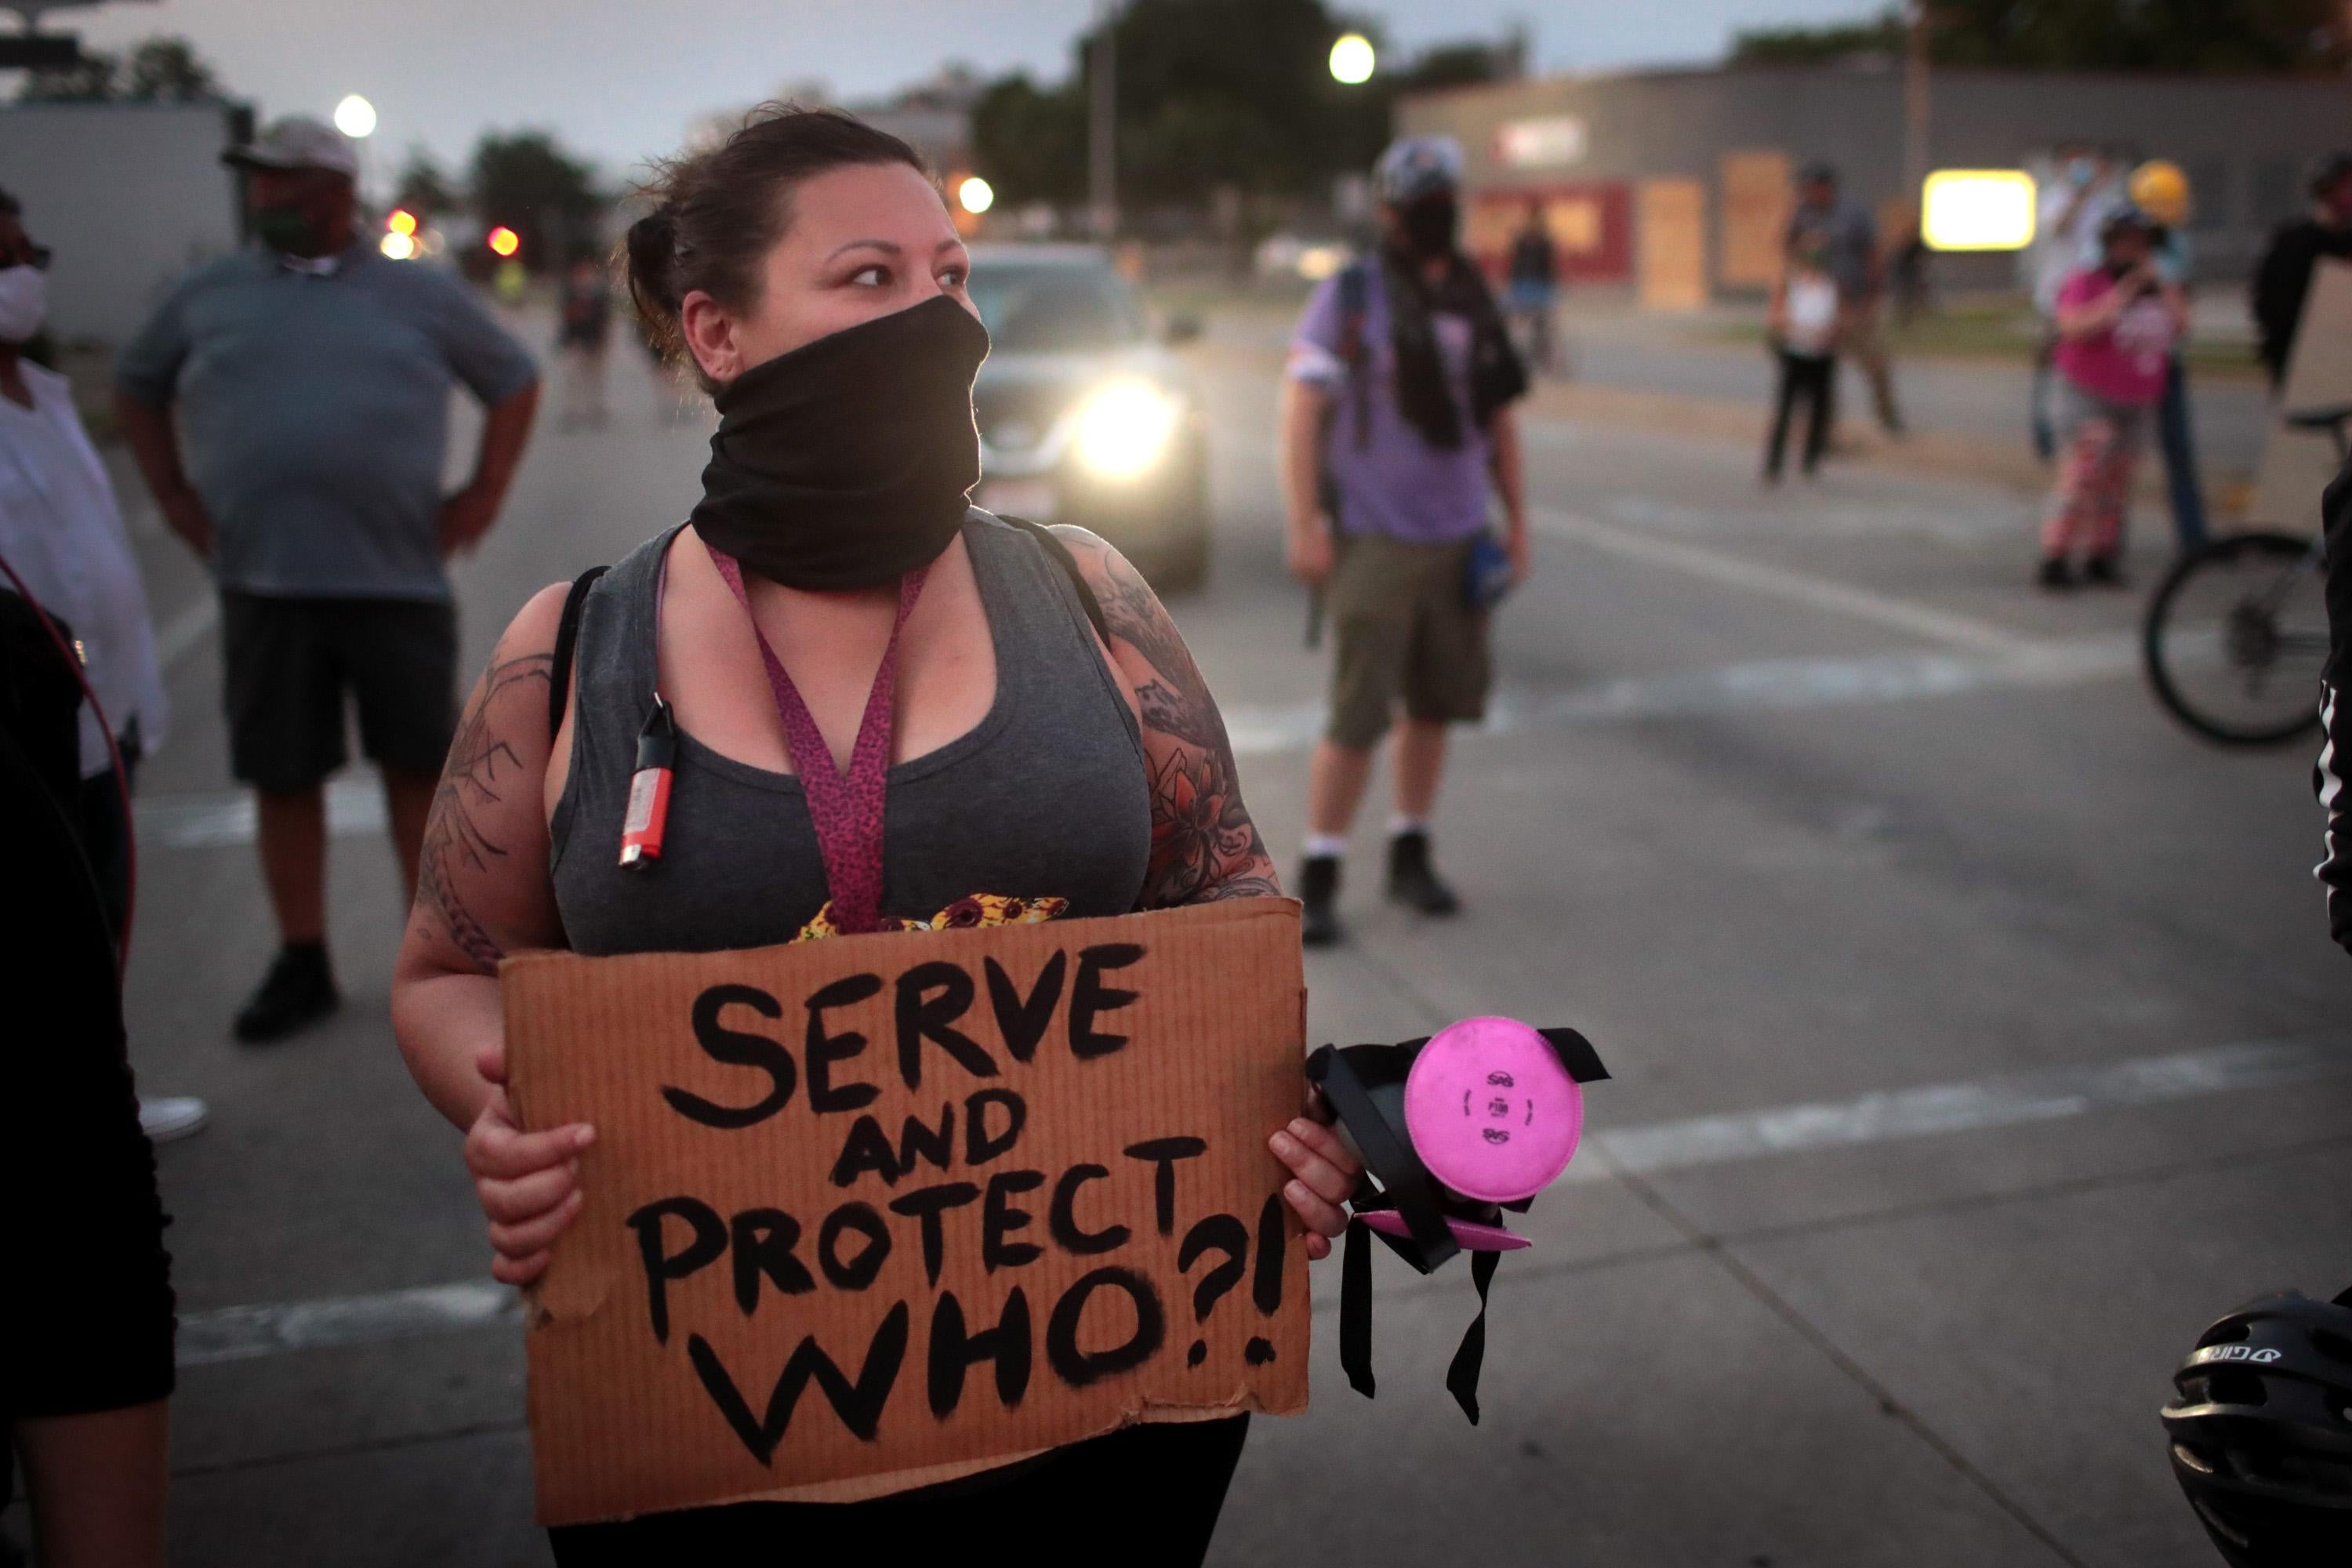 A masked woman holding a sign that reads "Serve and Protect Who?!" stands among other protesters in the street